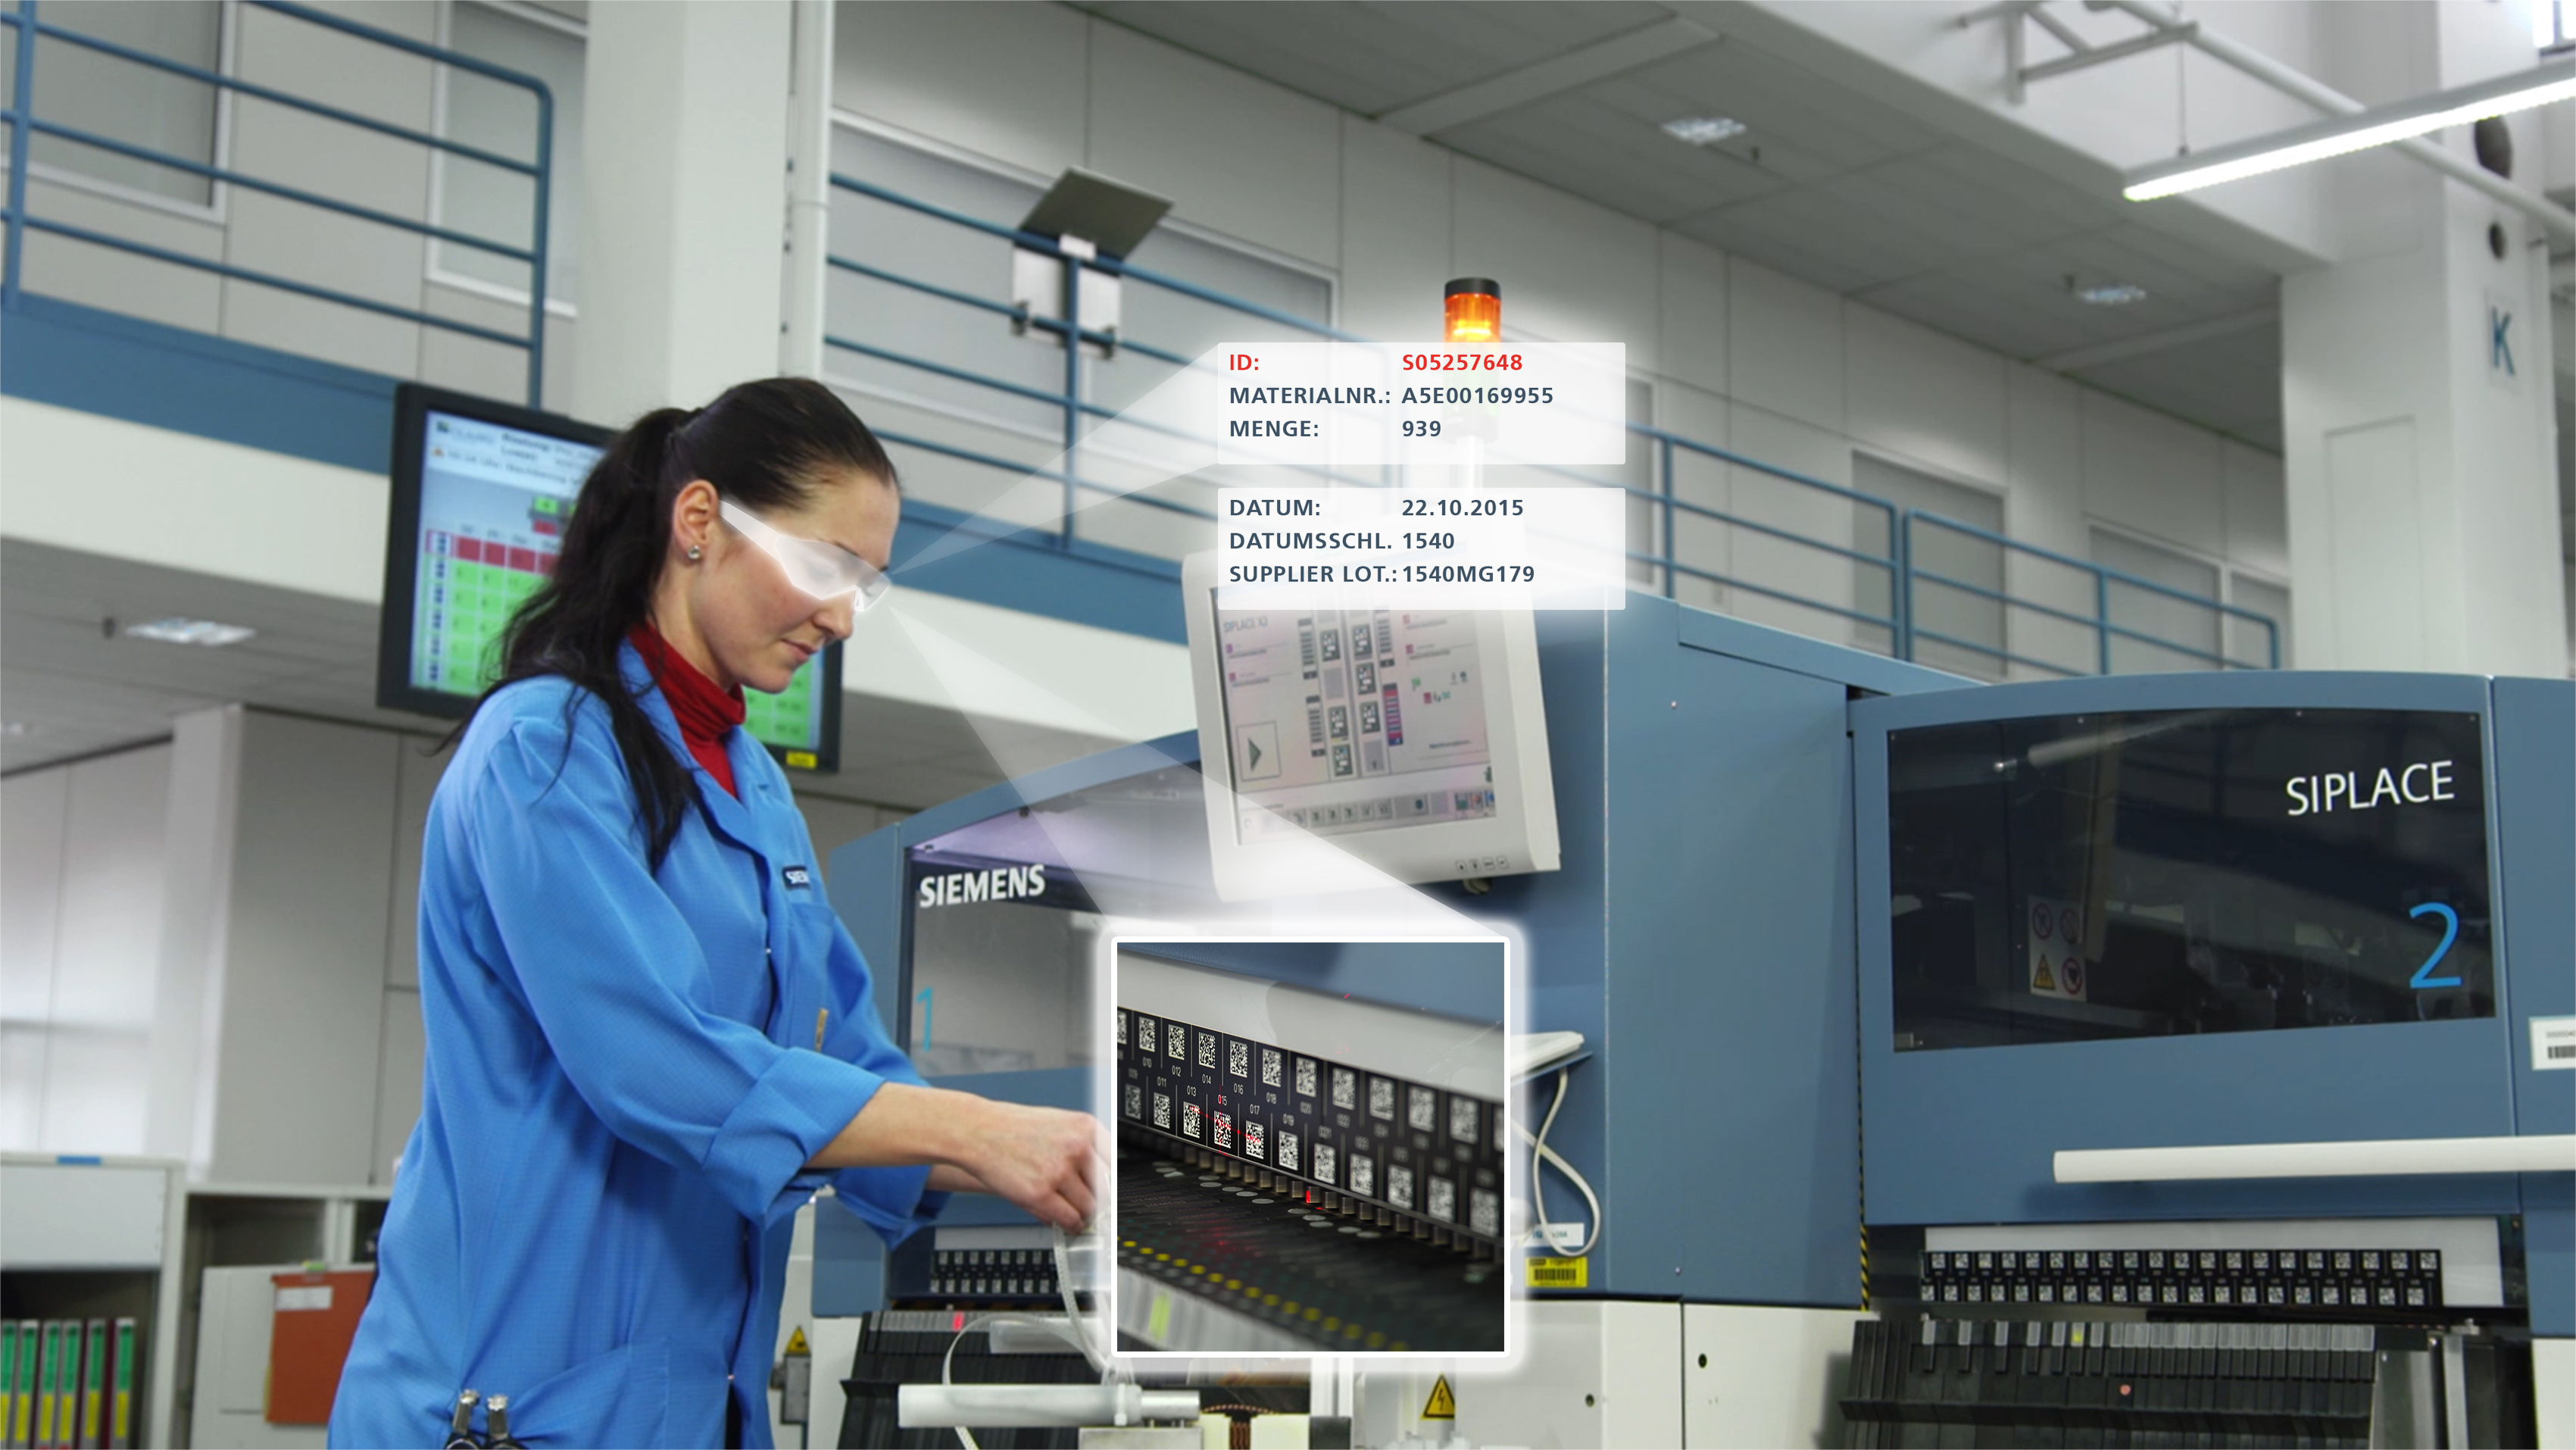 Use case for data glasses in the work place of setting up a machine.